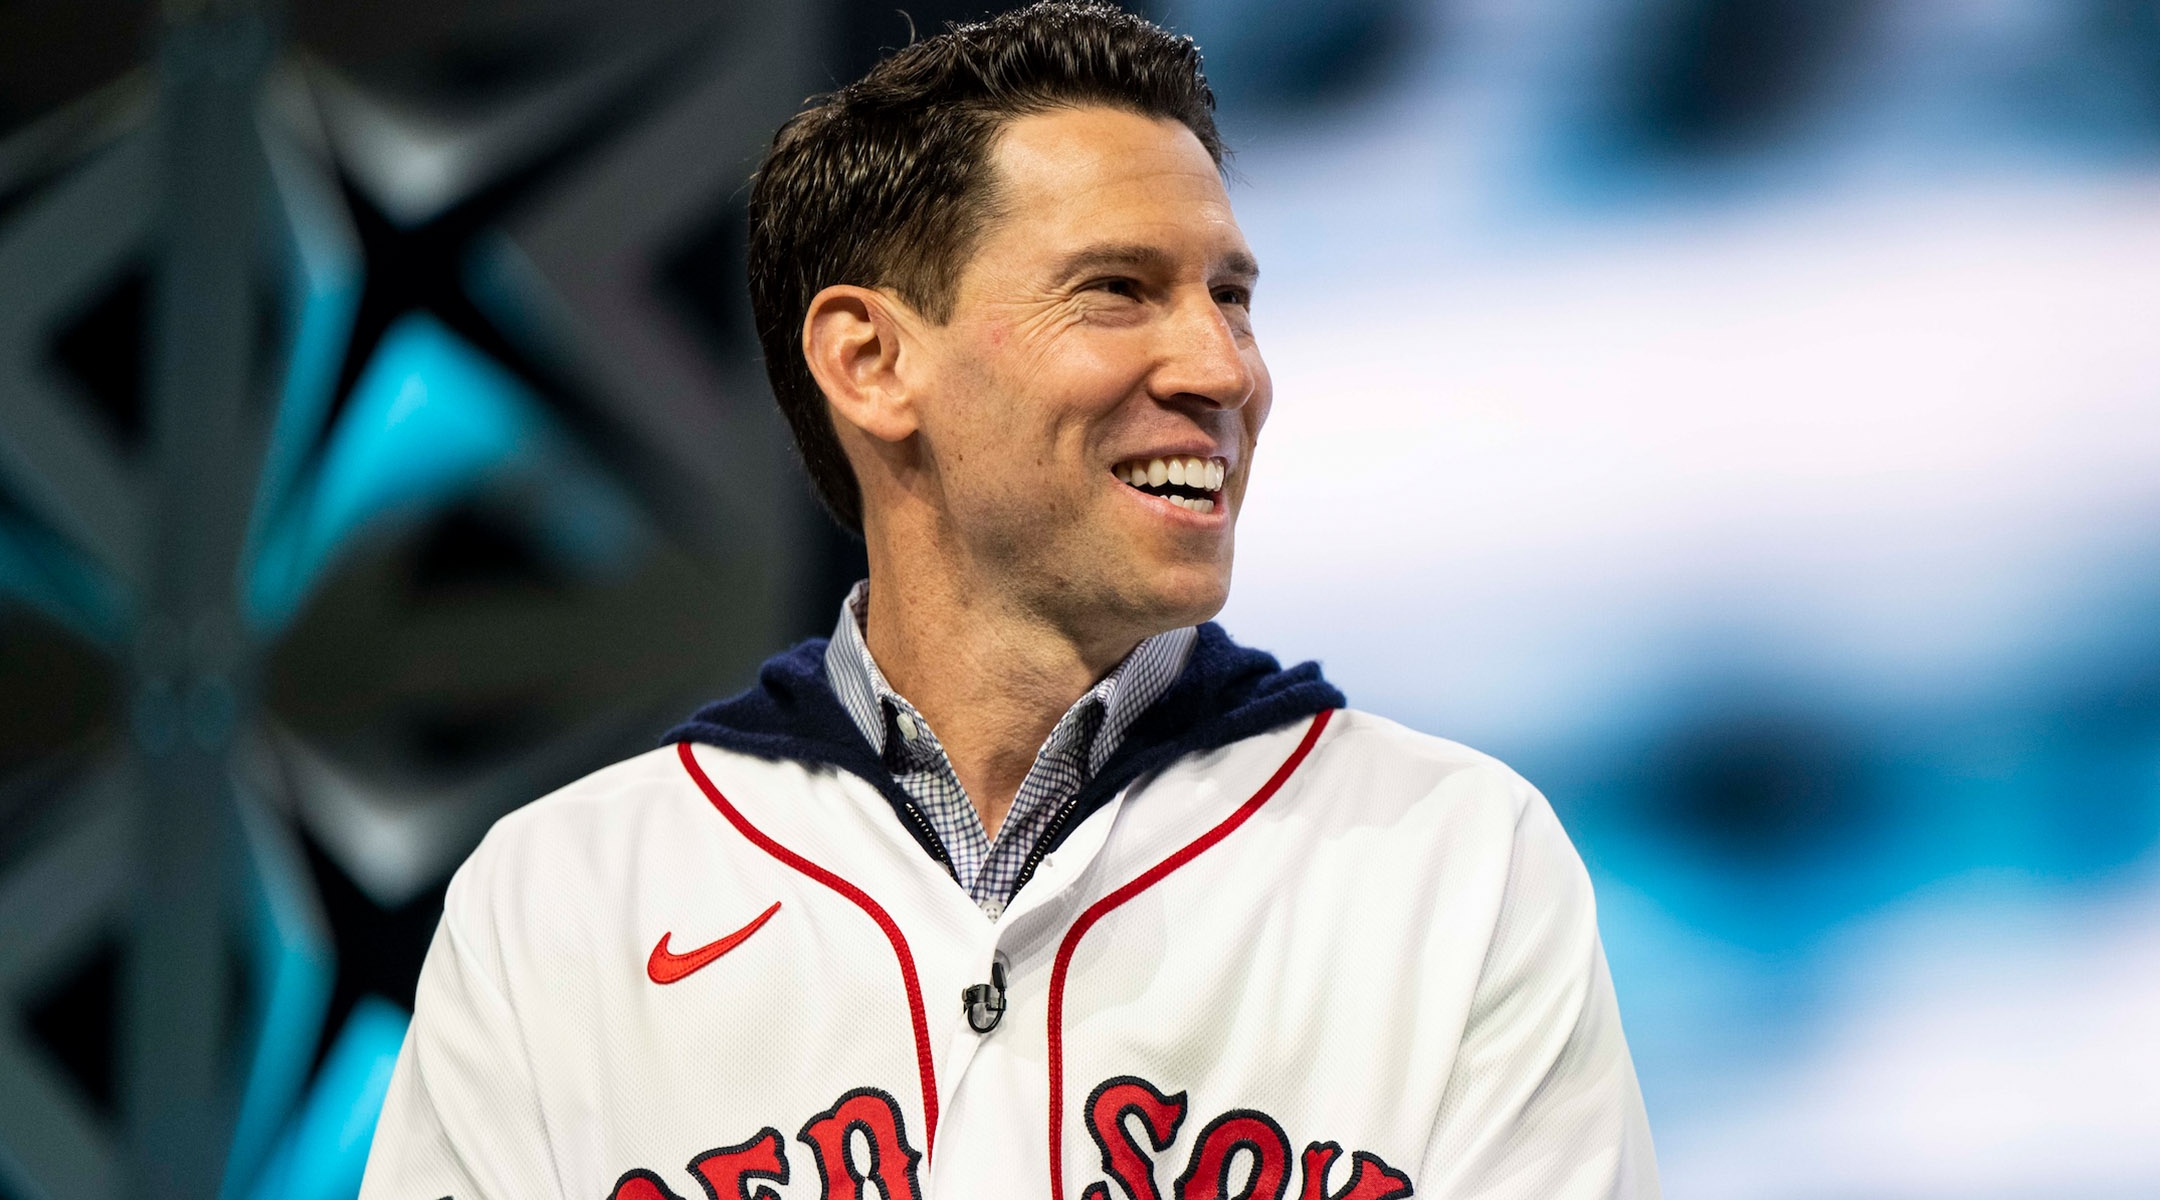 Craig Breslow speaks during the 2023 Boston Red Sox Winter Weekend at MGM Springfield and MassMutual Center in Springfield, Mass., Jan. 21, 2023. (Billie Weiss/Boston Red Sox/Getty Images)